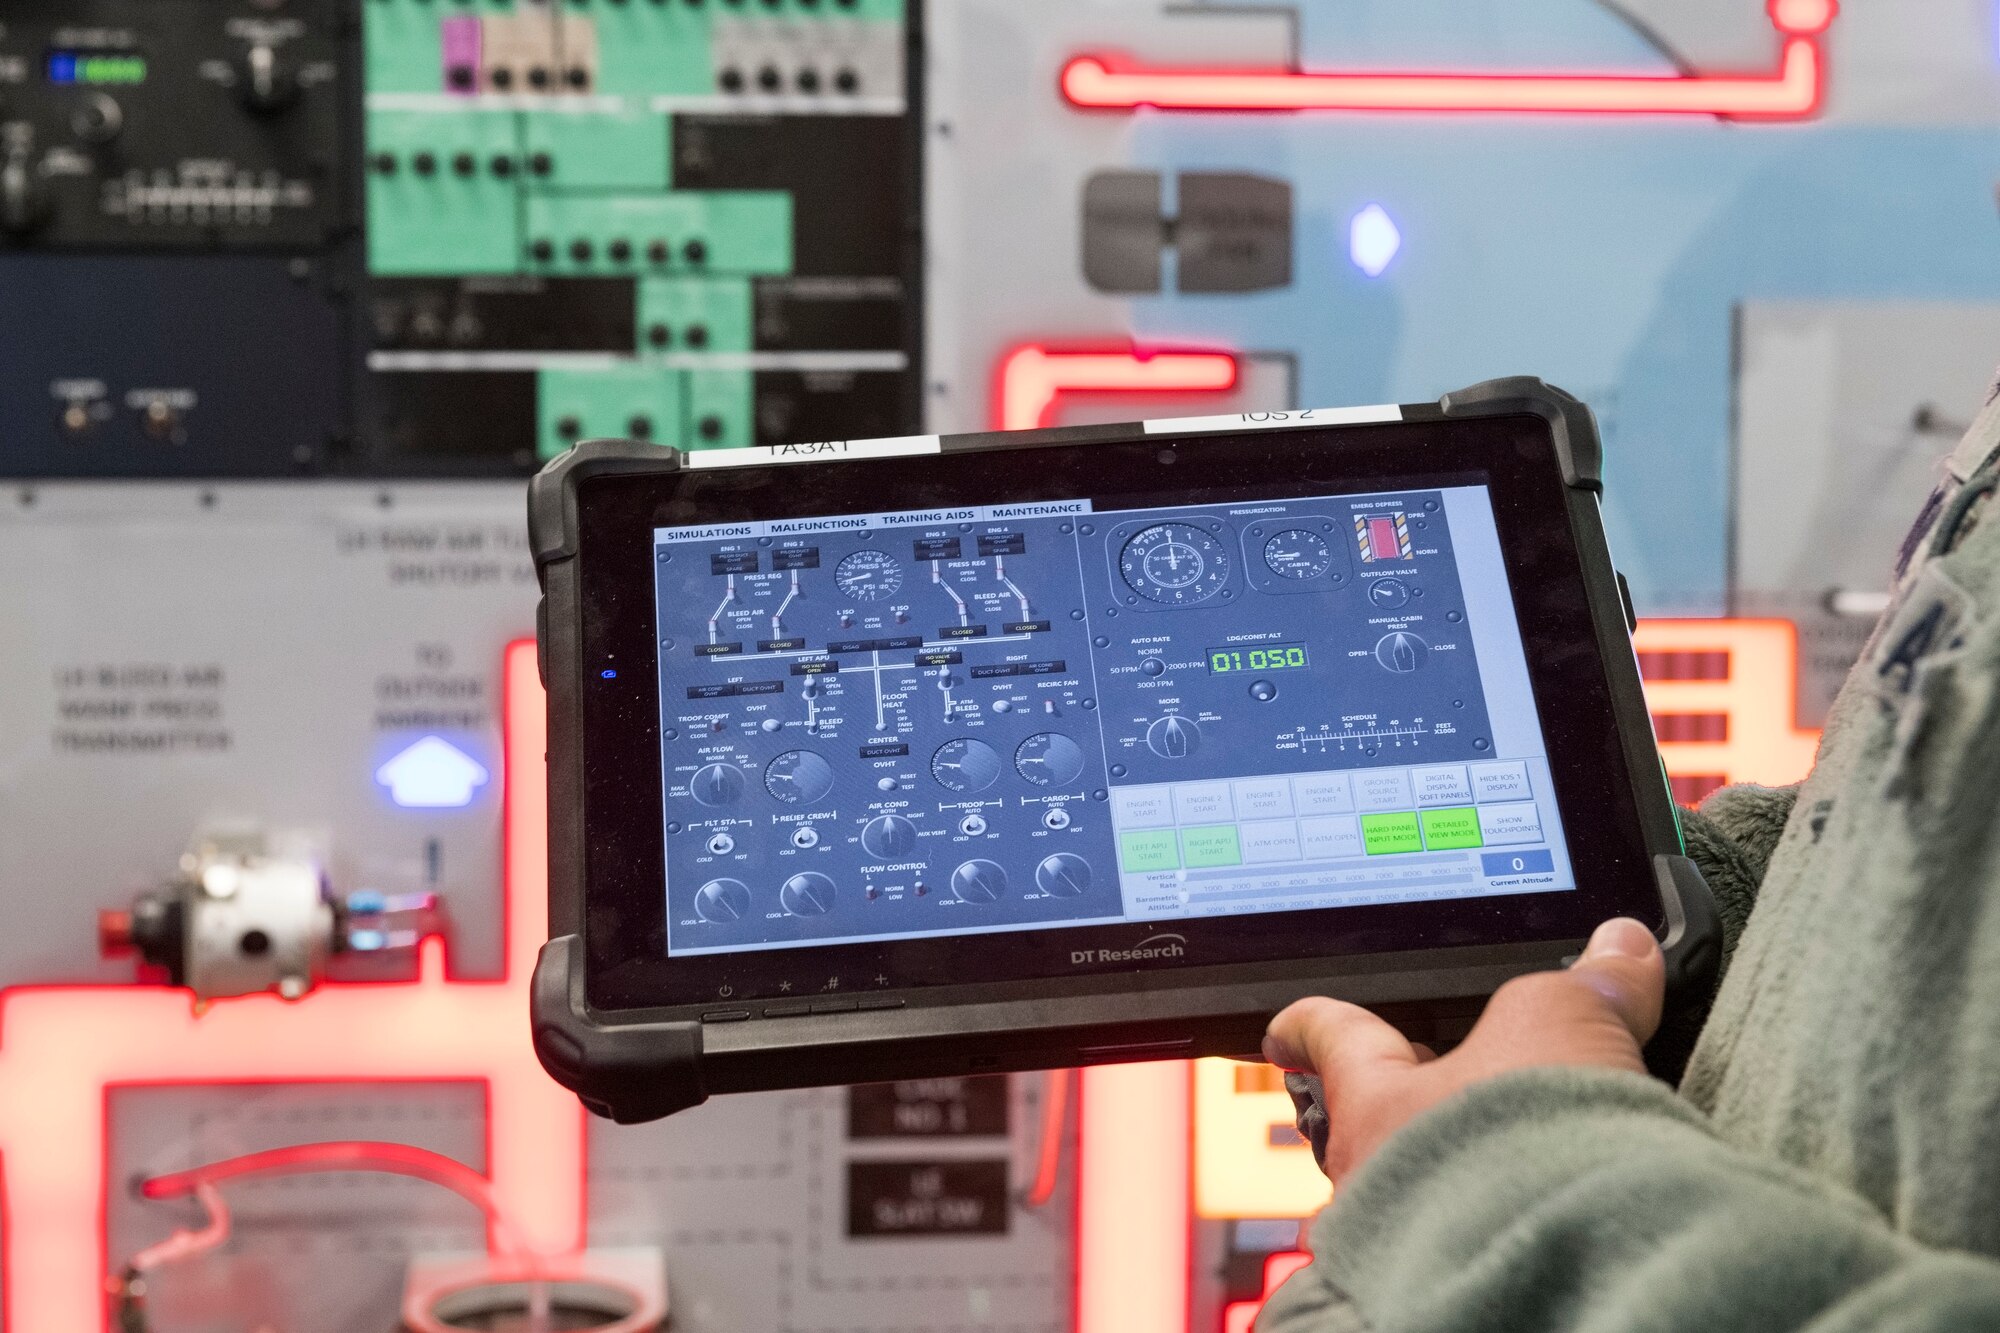 Staff Sgt. Jose Cardona, 373rd Training Squadron, Detachment 3, C-5M Electrical and Environmental Systems instructor, holds the Interactive Multimedia Instruction tablet for the C-5 Air Conditioning and Pressurization Systems Trainer Feb. 20, 2019, at the 373rd TRS, Det 3, on Dover Air Force Base, Del. The IMI allows Cardona to train students on the AC & PST by monitoring actions, inputting malfunctions and simulating on-the-ground or inflight scenarios.(U.S. Air Force photo by Roland Balik)